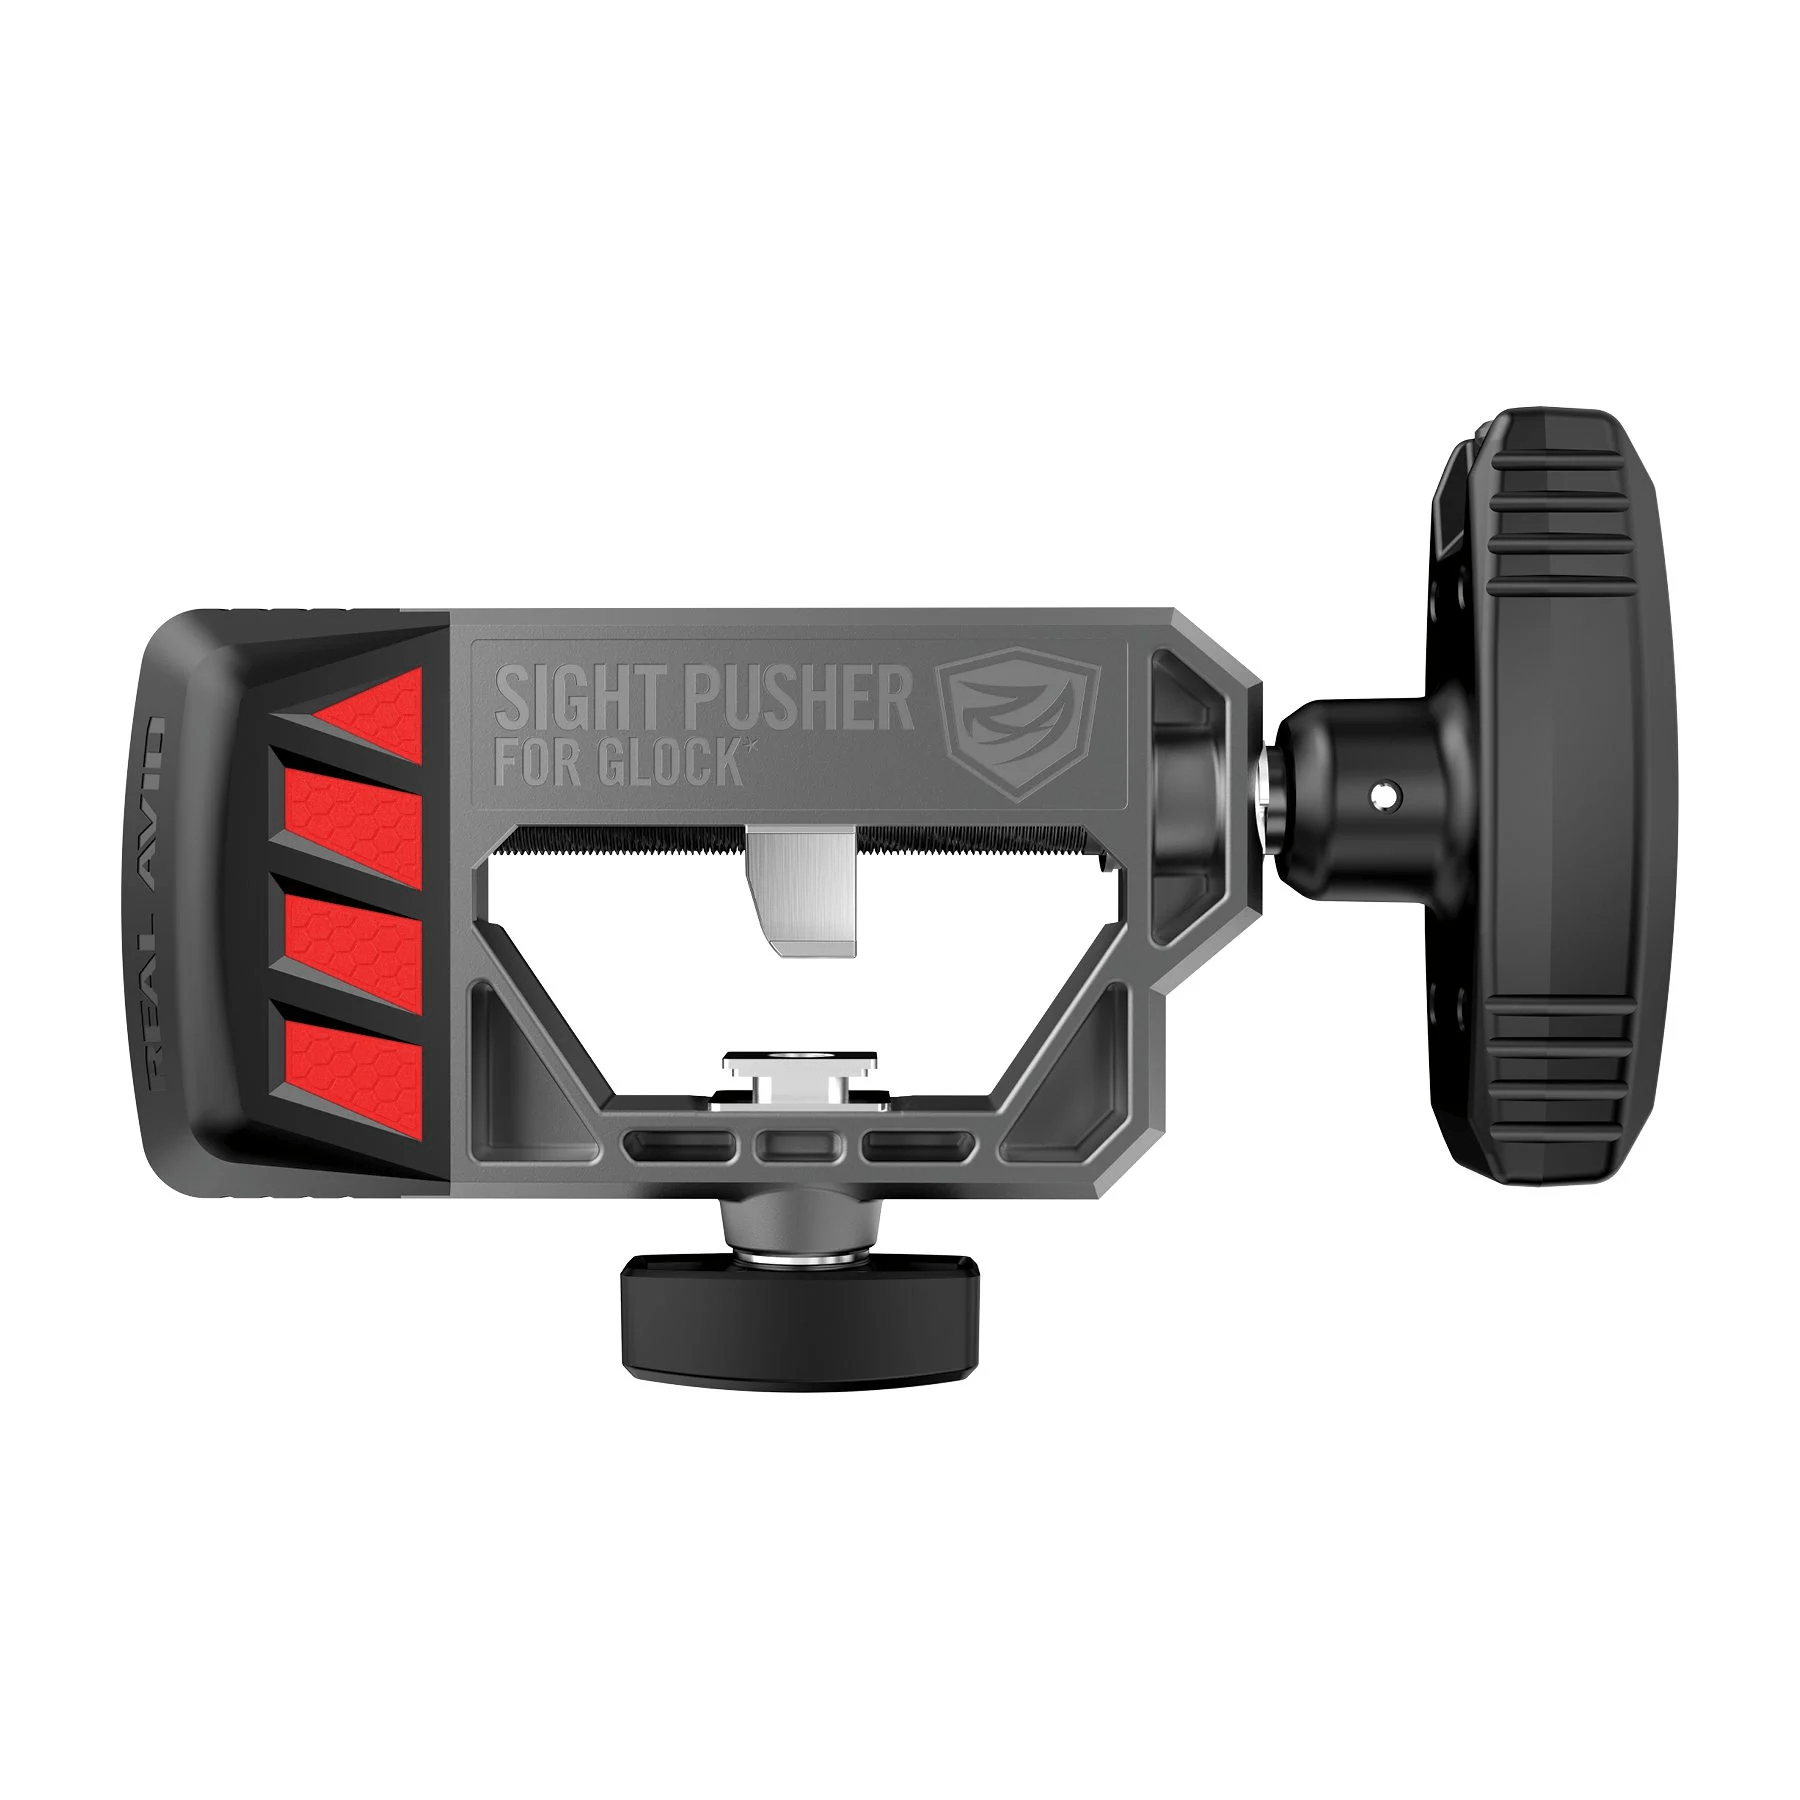 Real Avid Sight Pusher for Glock AVGLOCKSP - Shooting Accessories